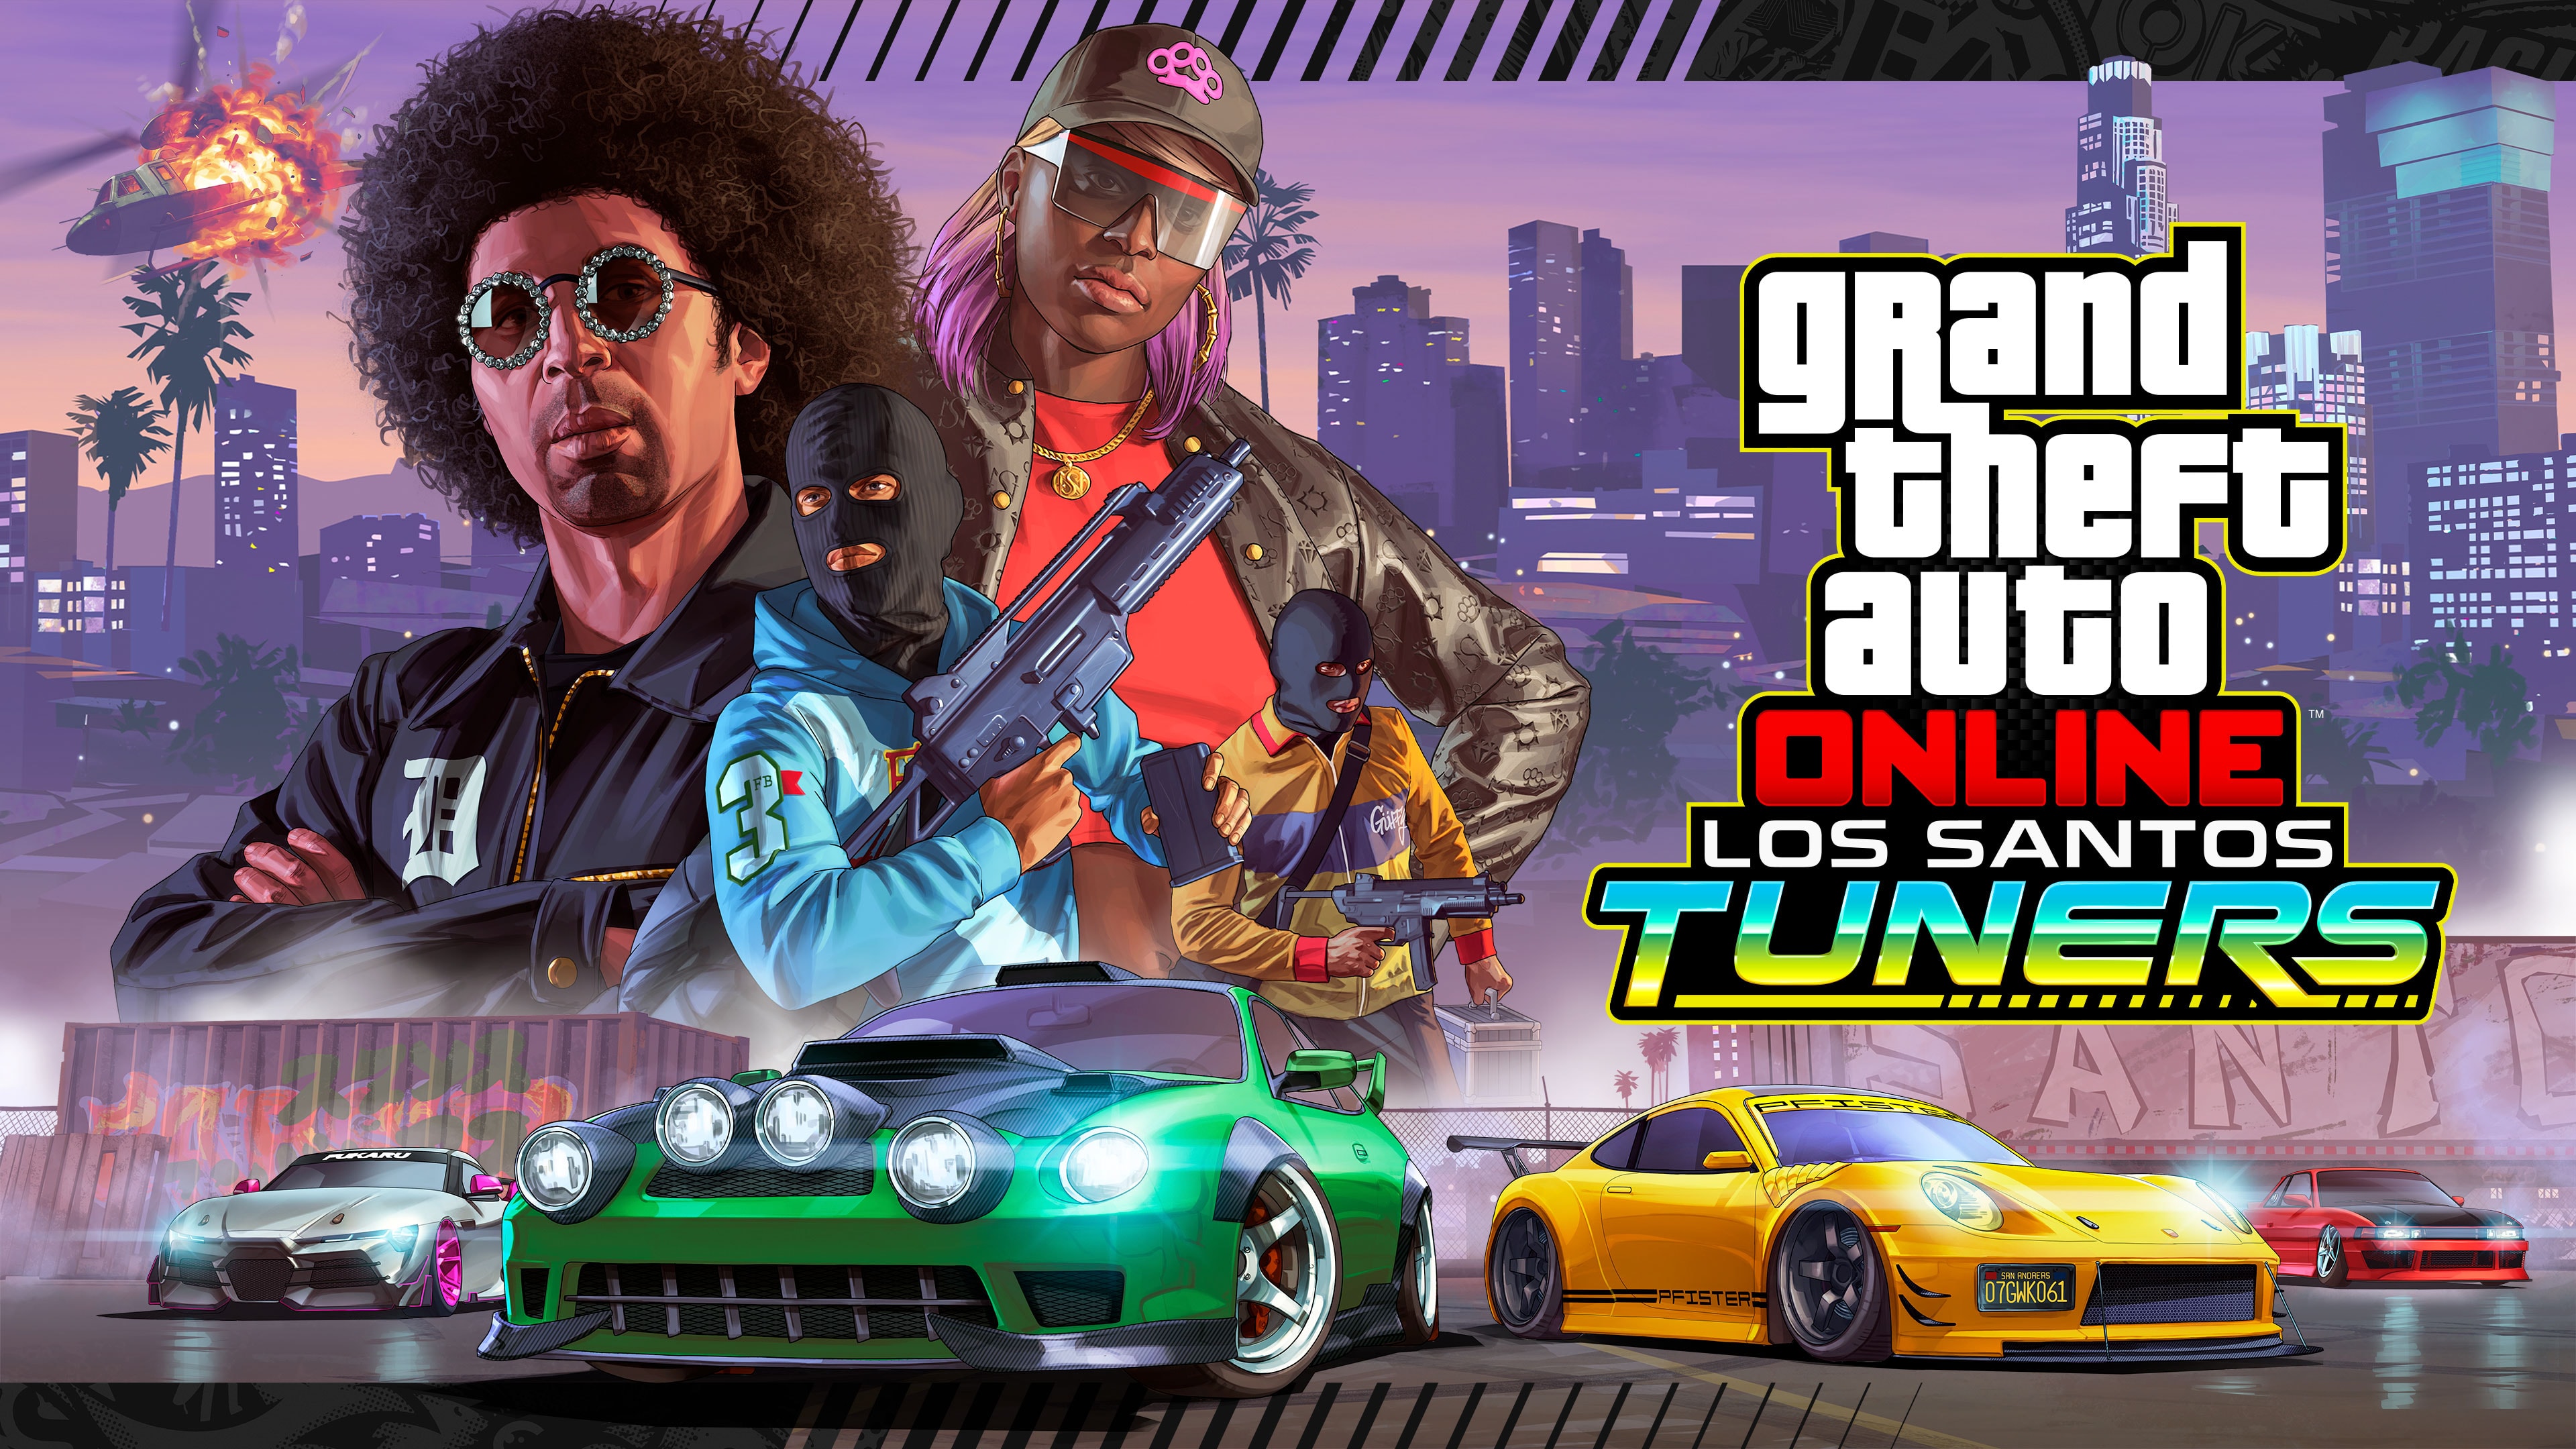 Gta online los santos tuners hd papers and backgrounds